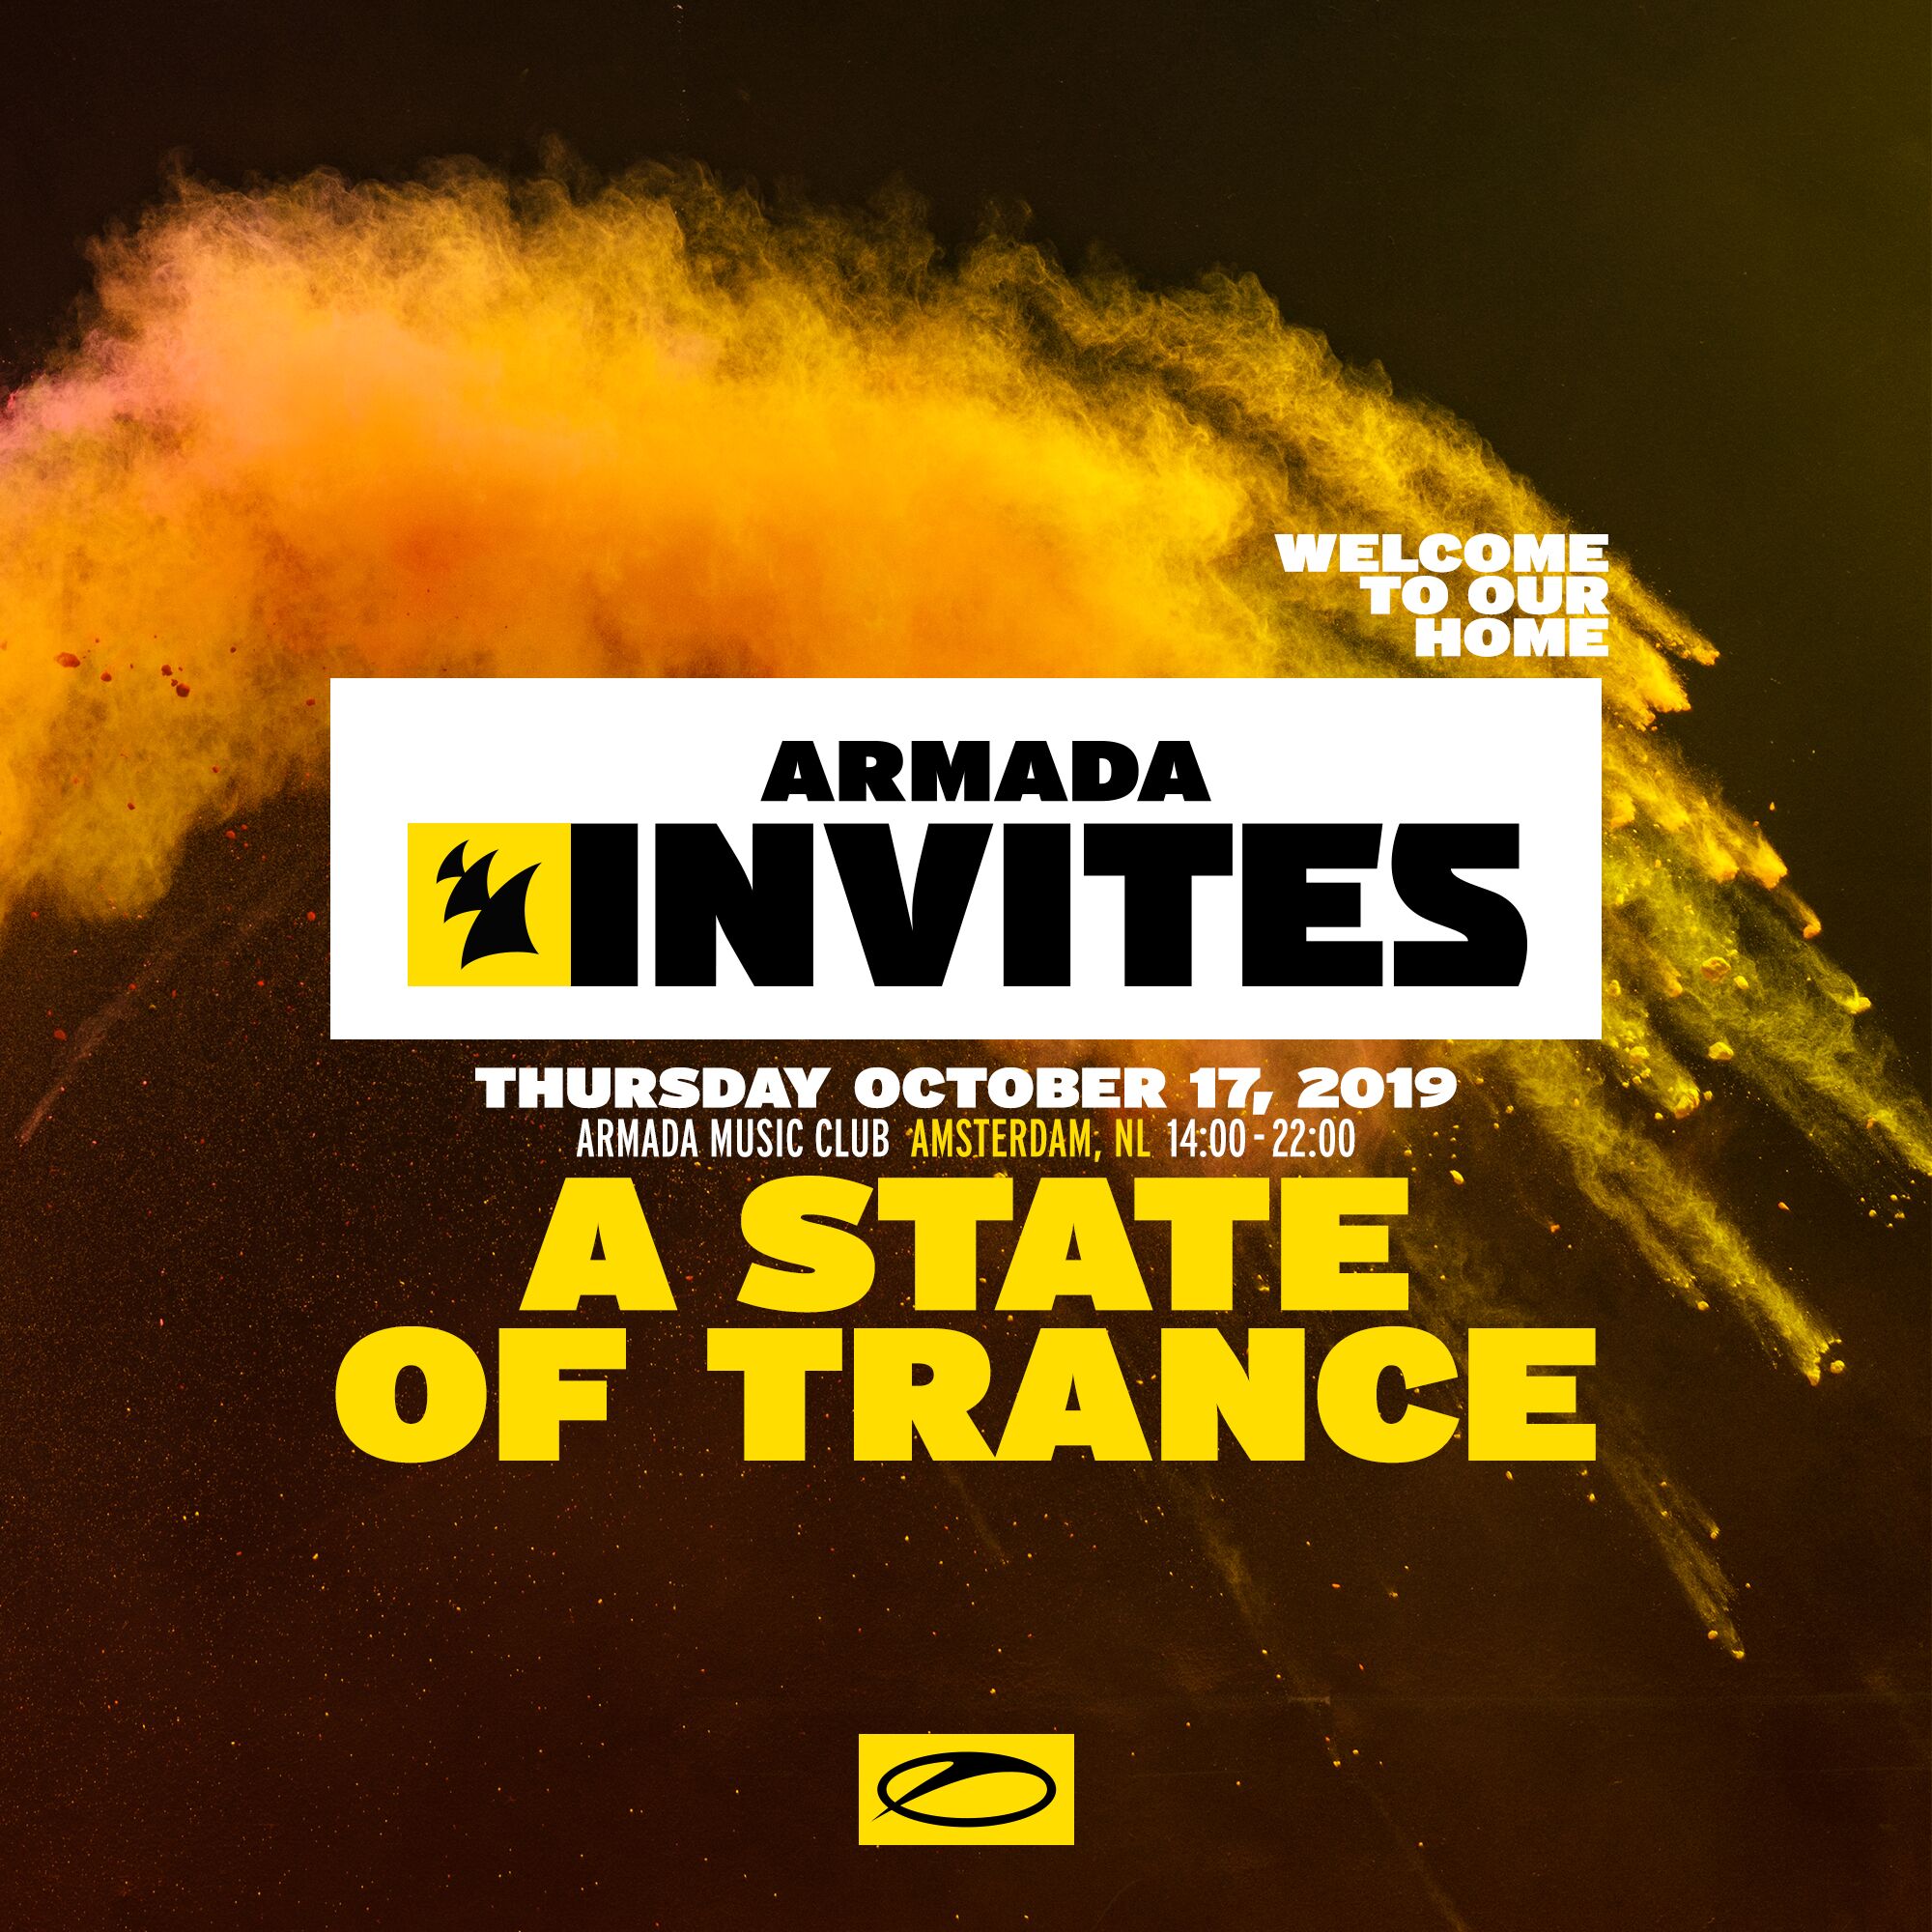 Armada Invites presents A State Of Trance at Armada Music Club, Amsterdam, NL for ADE 2019 on 17th of October 2019